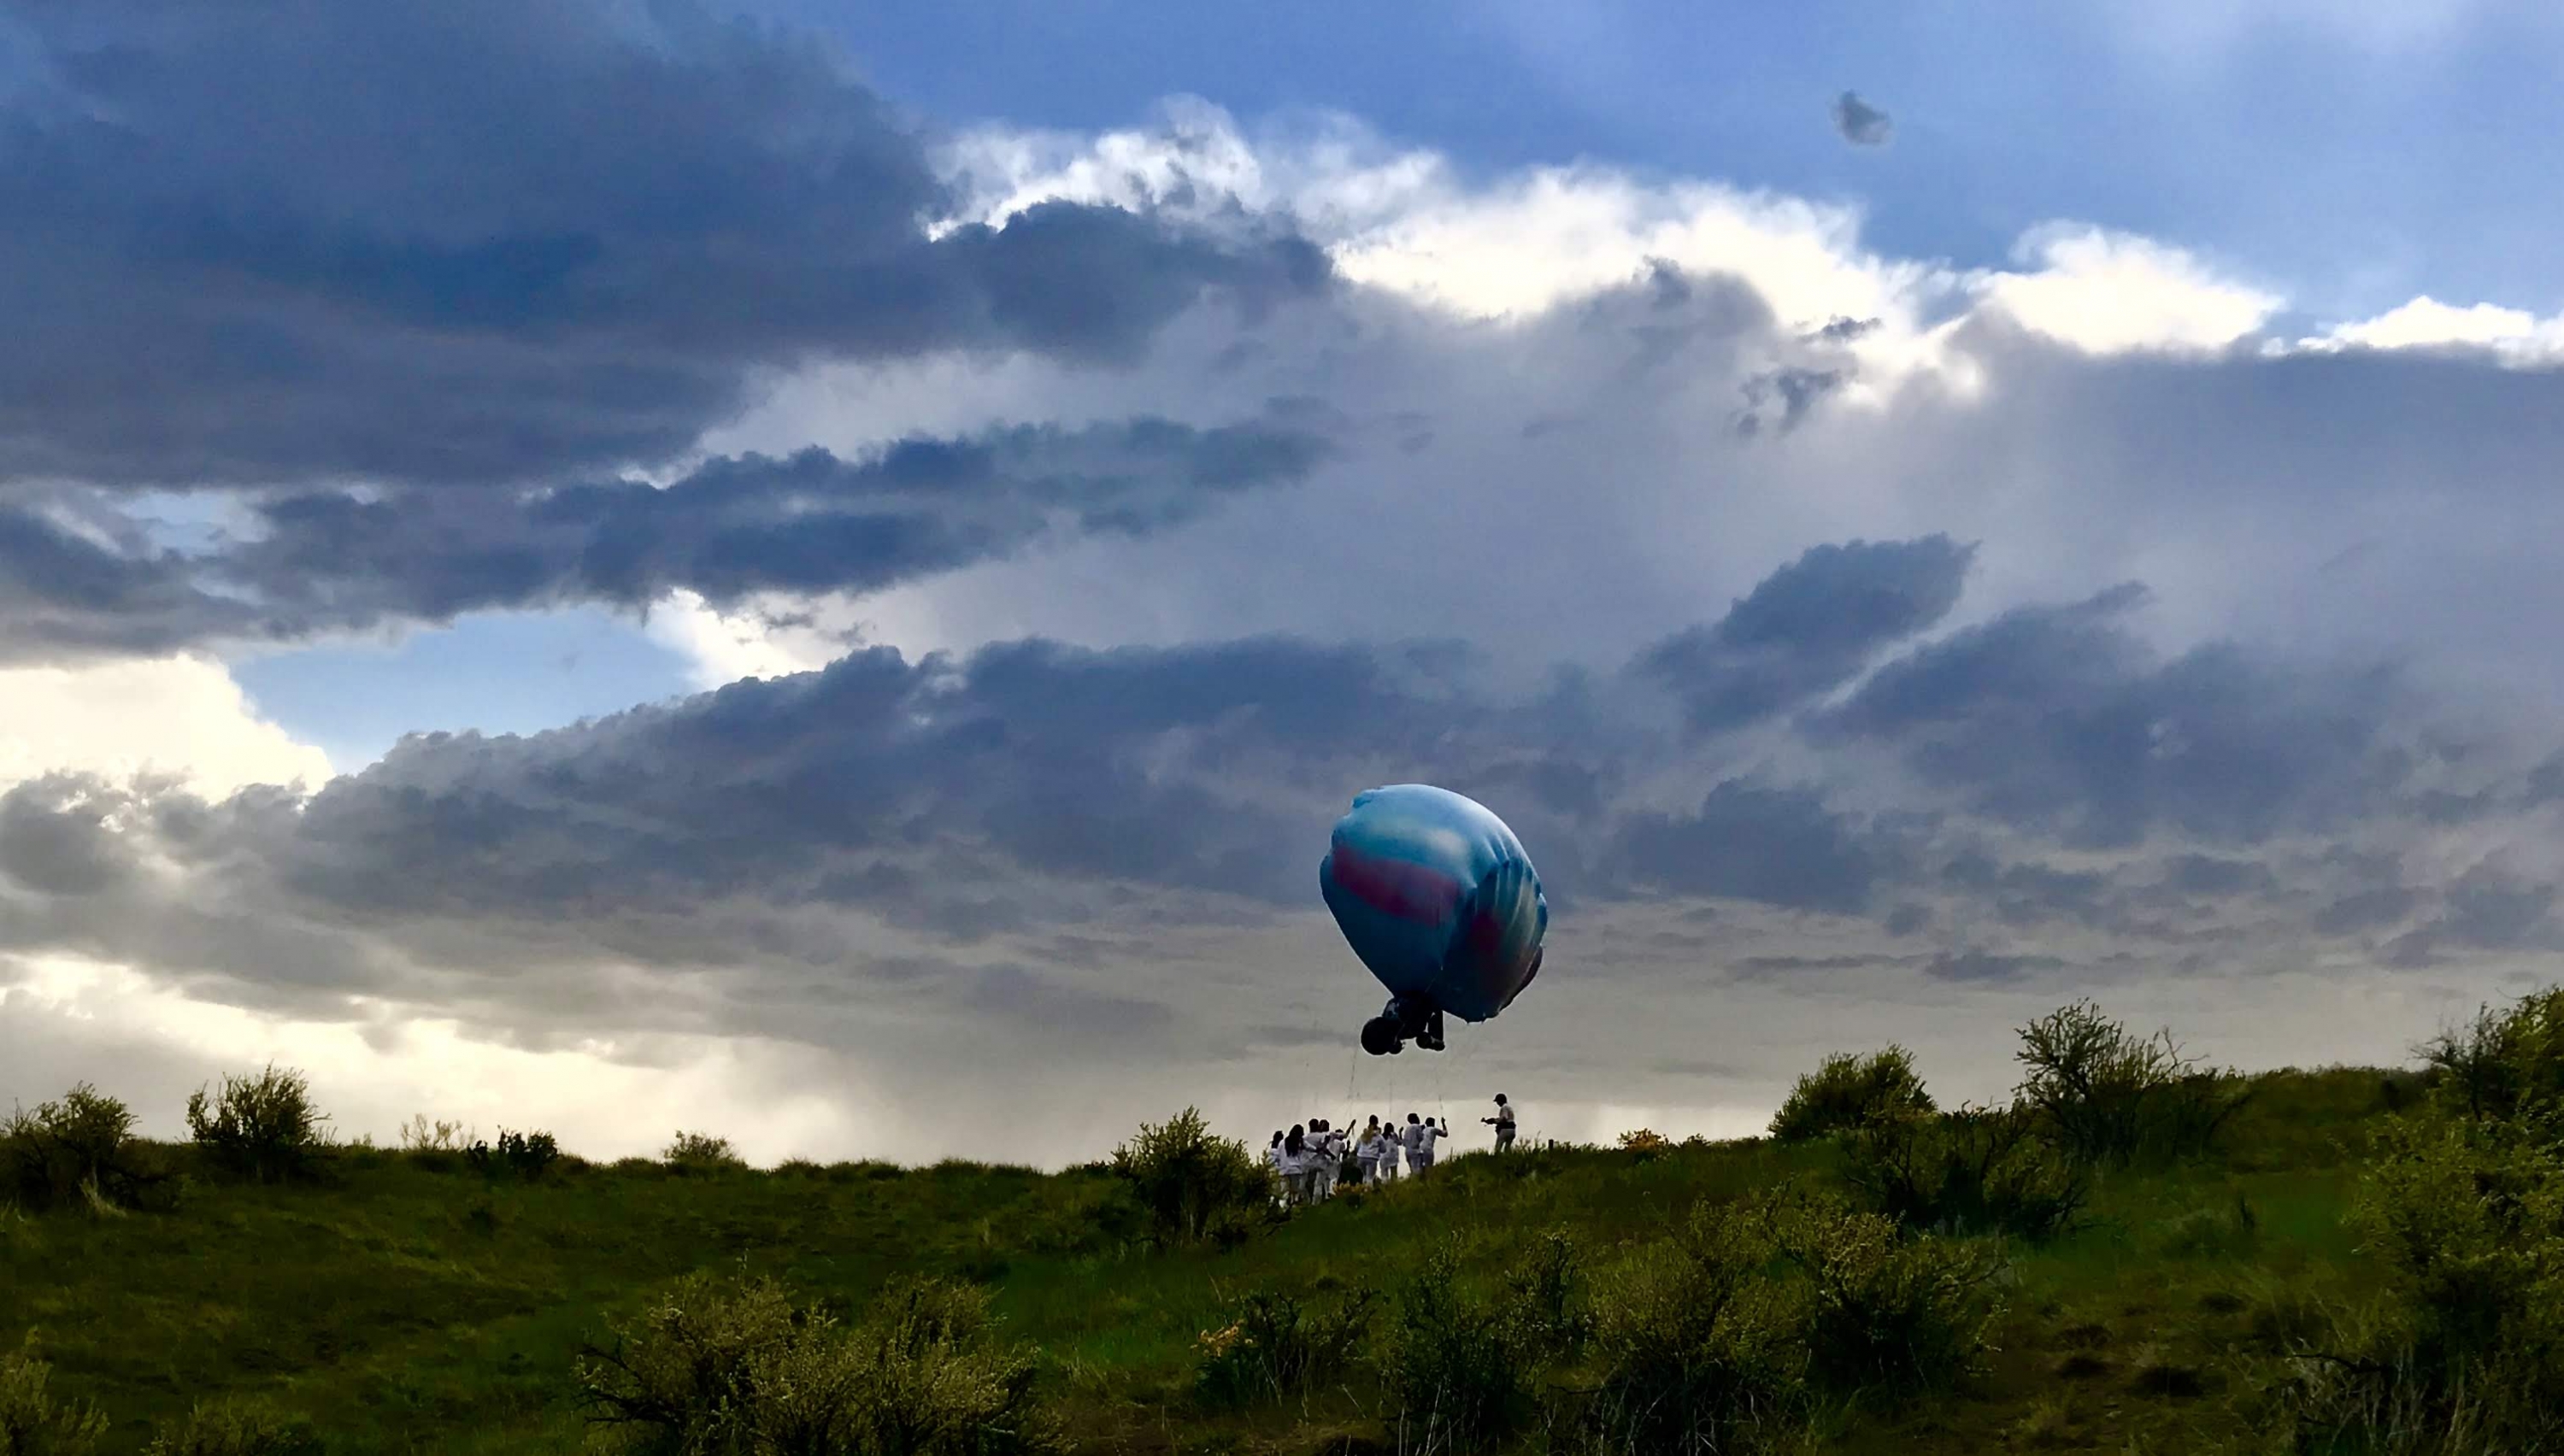 Cloudship performance art in the Boise foothills